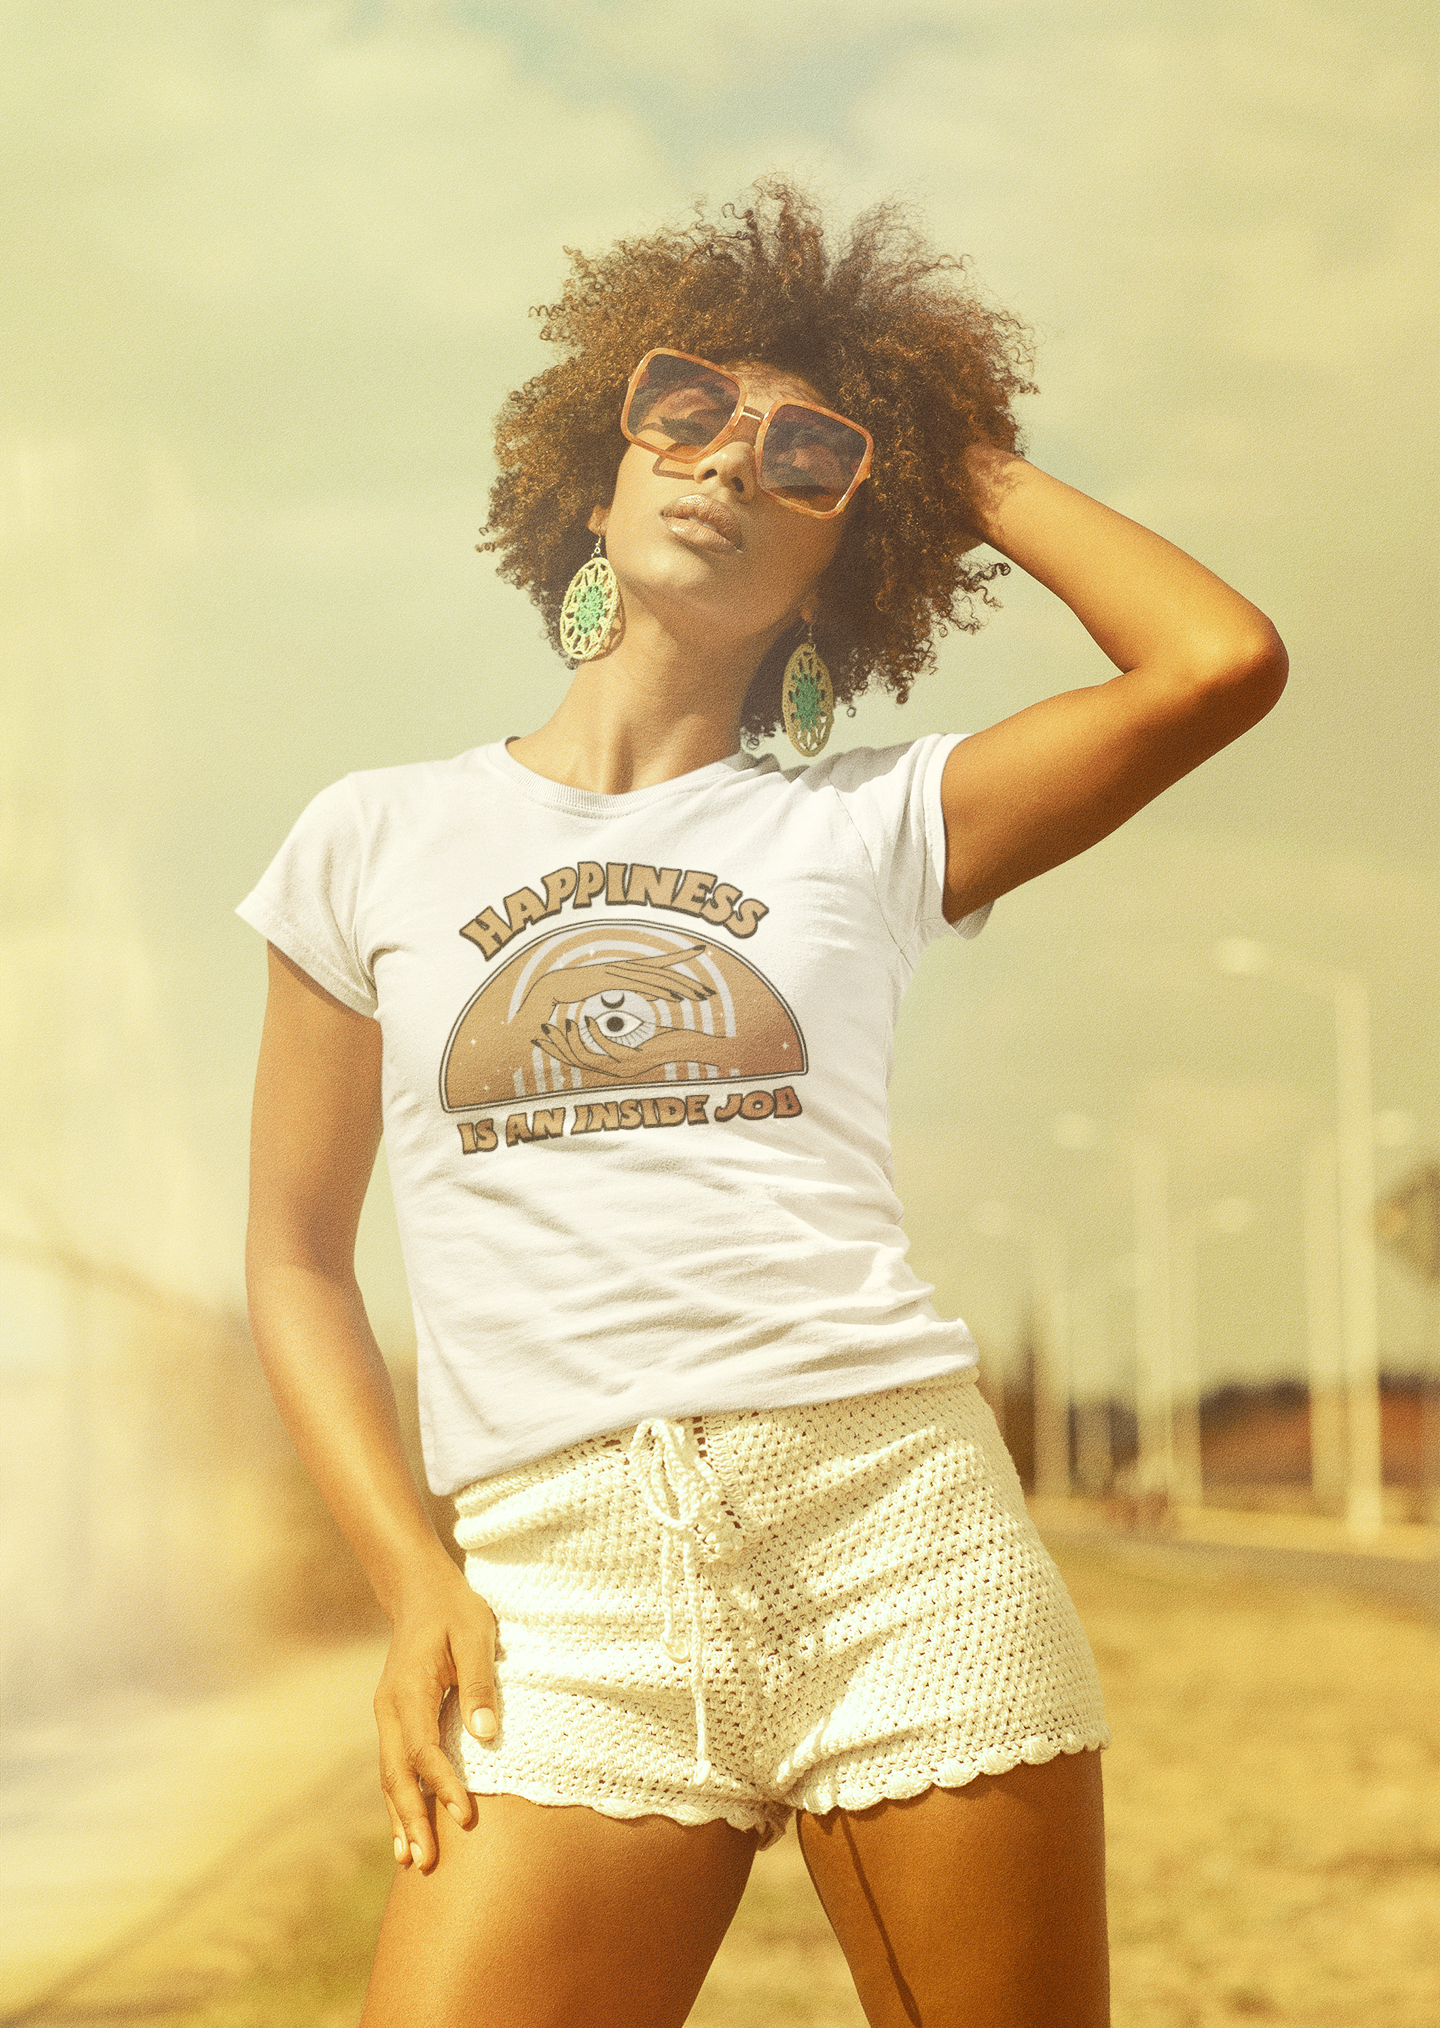 "Happiness is an Inside Job" Vintage Style - Women's short sleeve t-shirt